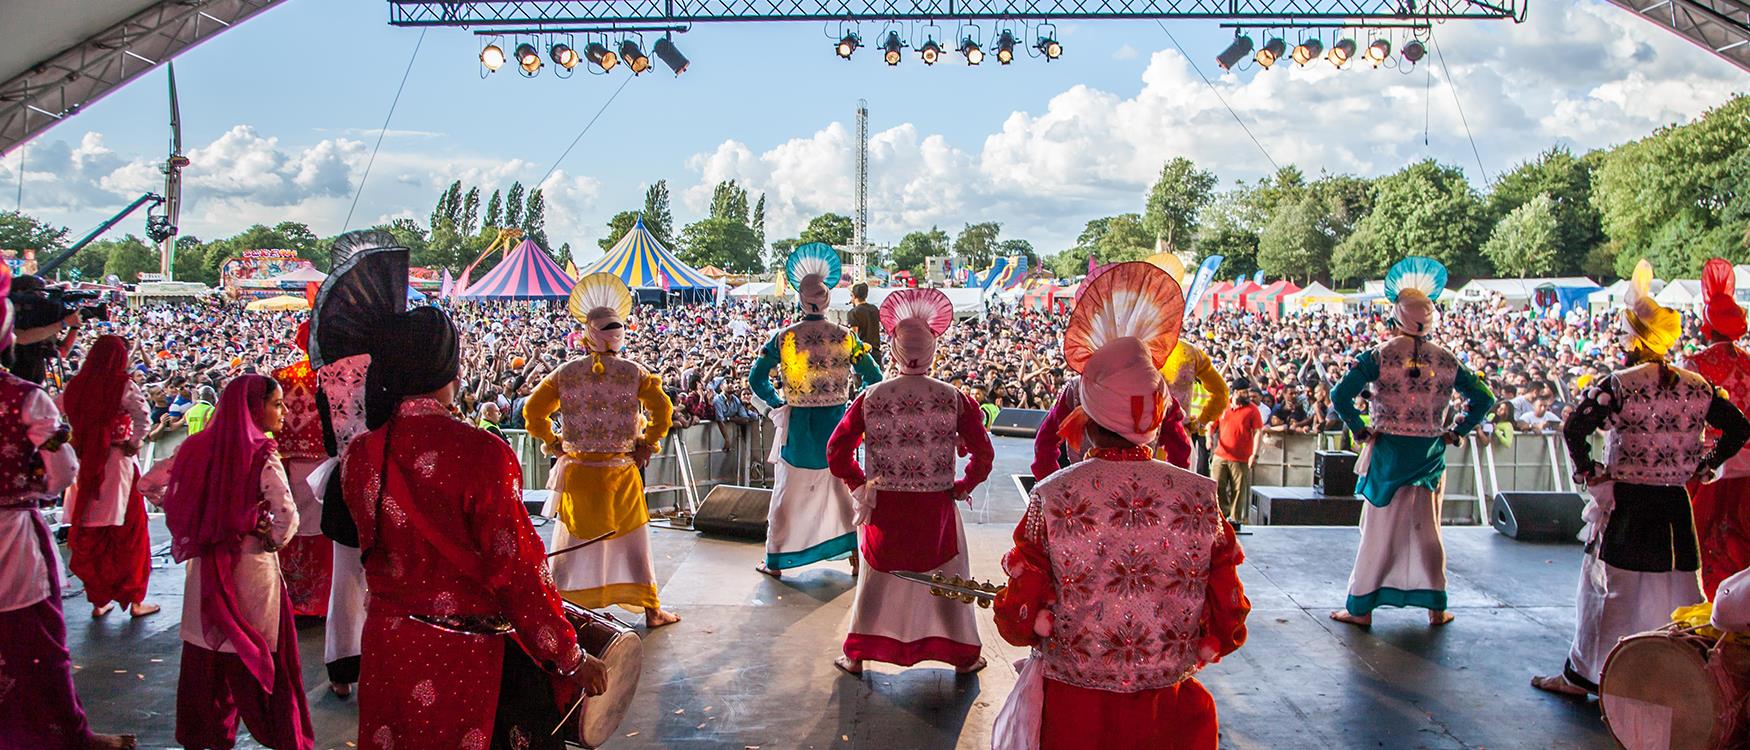 Events for your diary (this image: Sandwell & Birmingham Mela)